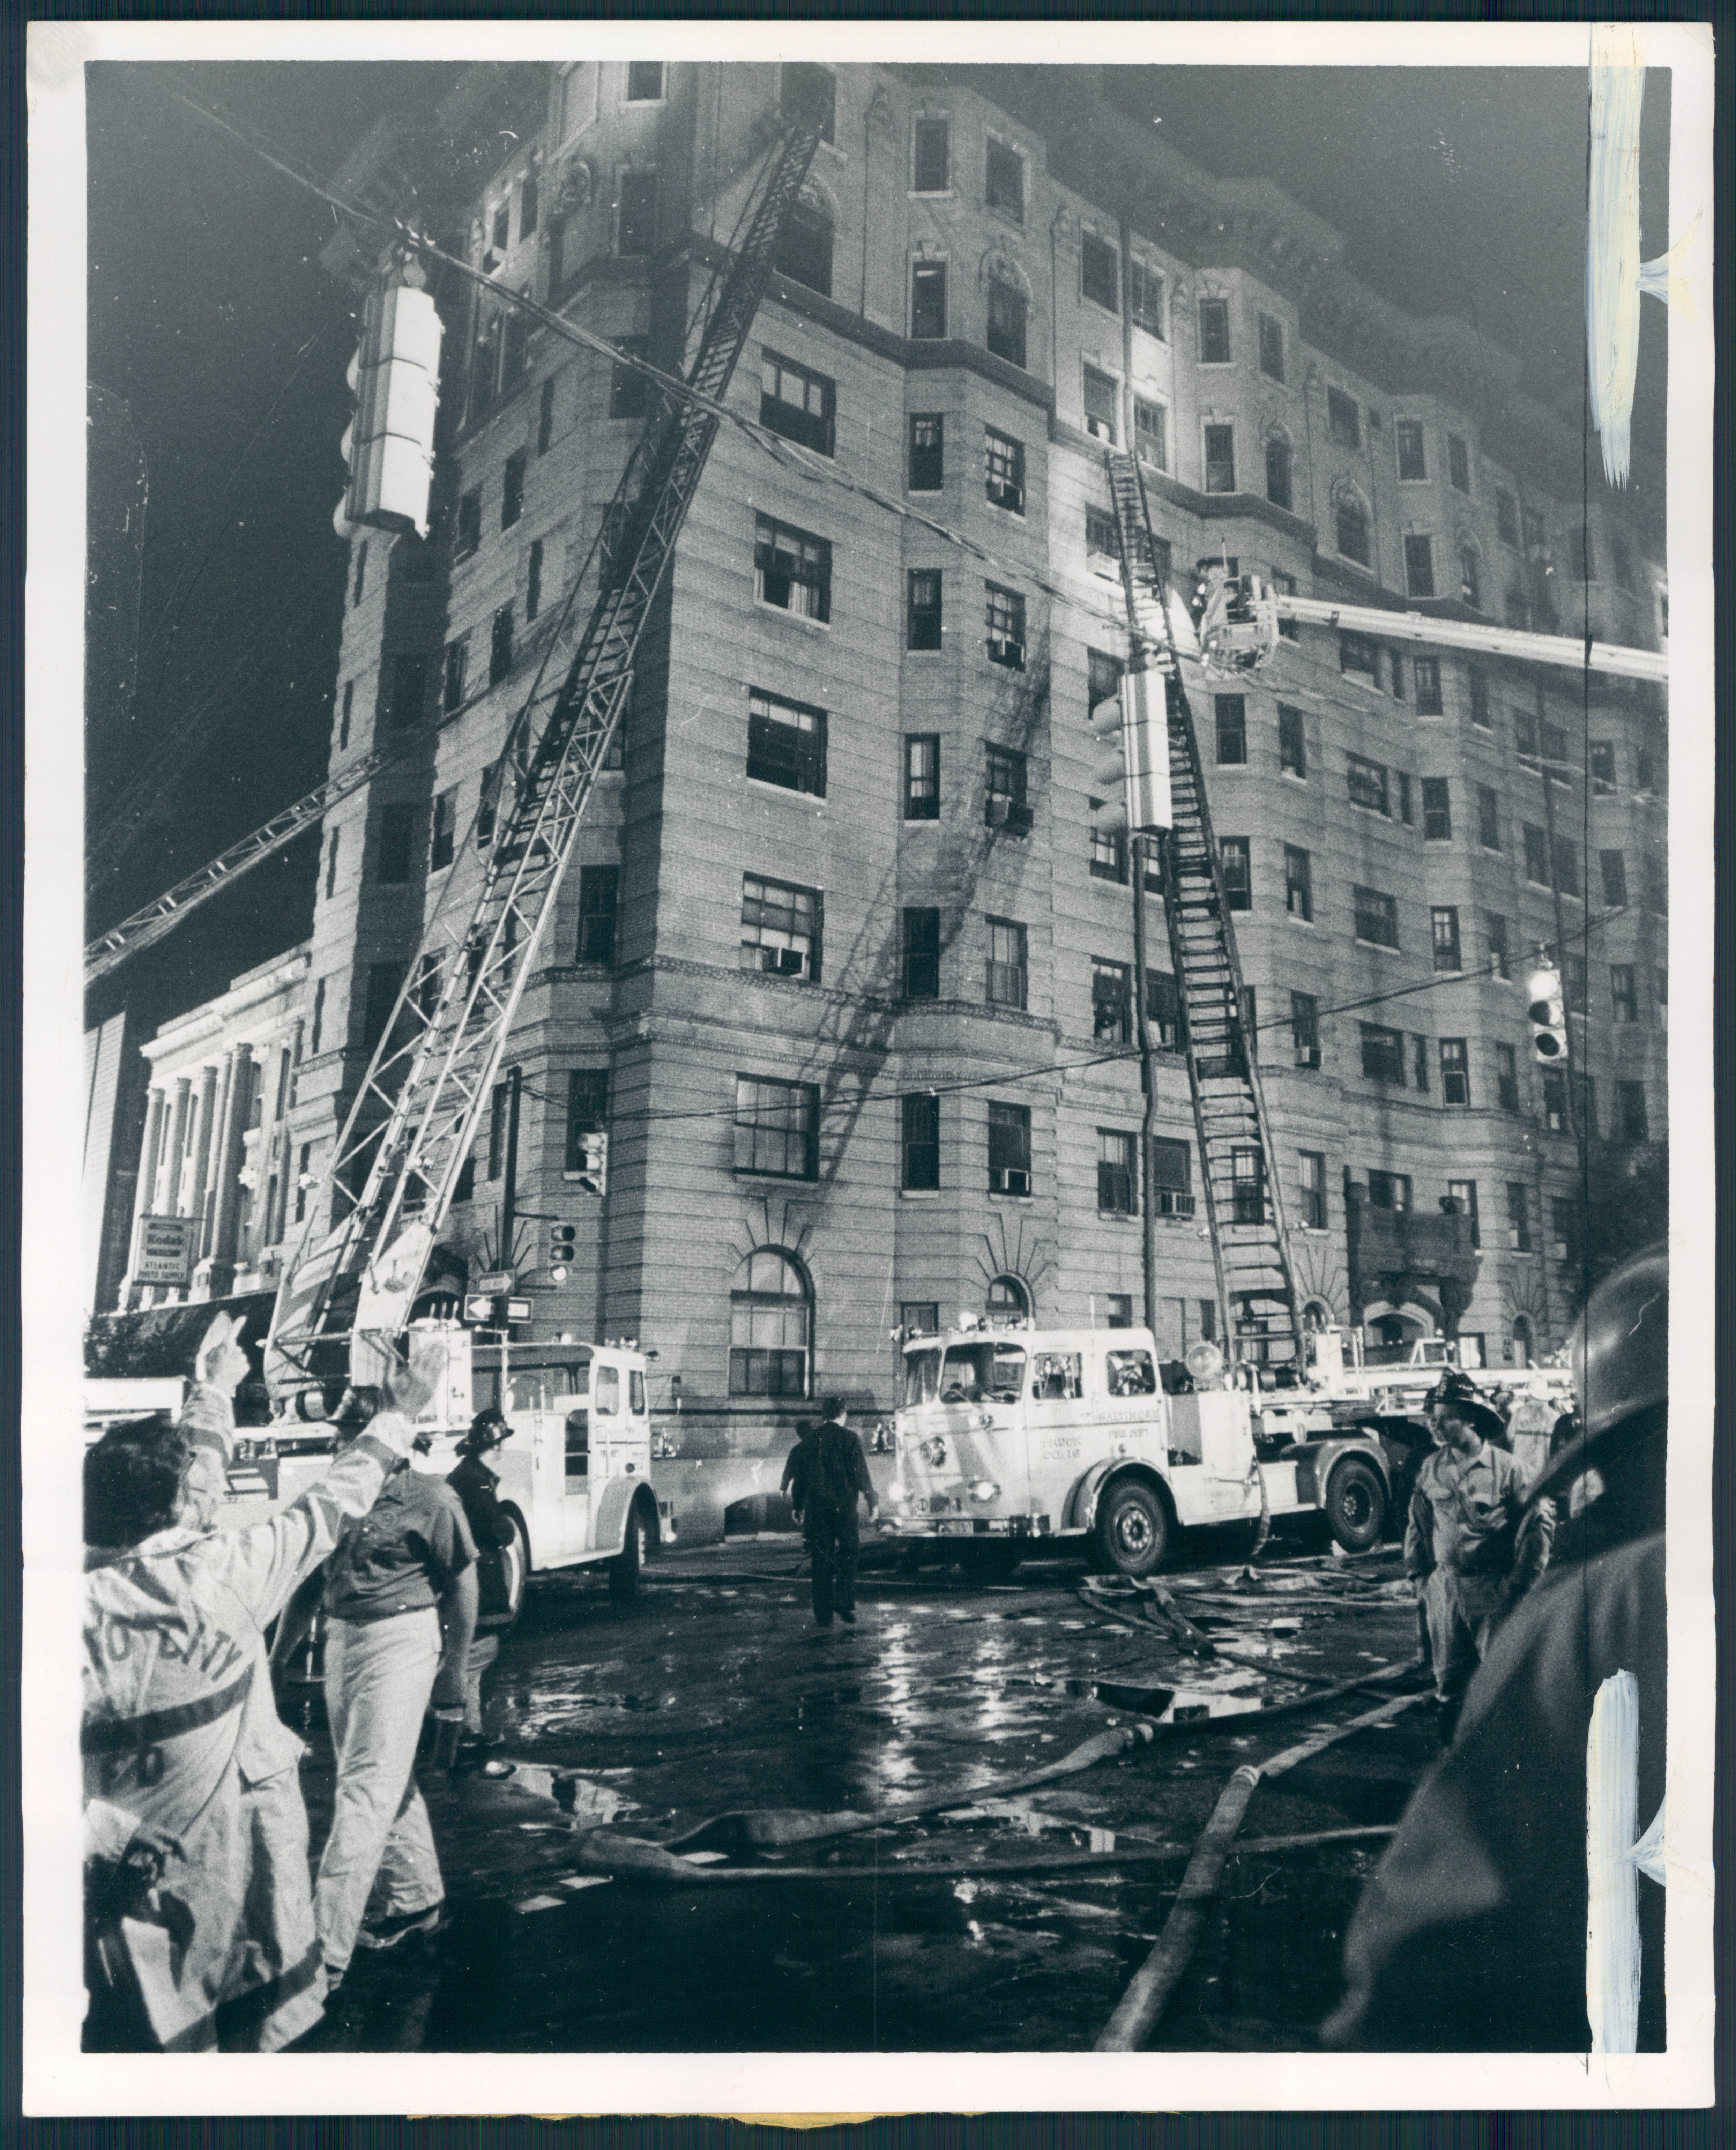 September 5, 1974 - 5-ALARM ACTION -- Ladders are raised to the top floors of the Earl Court Apartments to rescue residents, trapped by blaze early today on St. Paul Street. Photo by Walter M. McCardell BAD-521-BSDate Created: 1974-09-05 Copyright Notice: Baltimore Sun Folder Description: Apartments Folder Extended Description: ( 1). |HOUSES BALTIMORE Title: APARTMENT HOUSES BALTIMORE Subject: APARTMENT